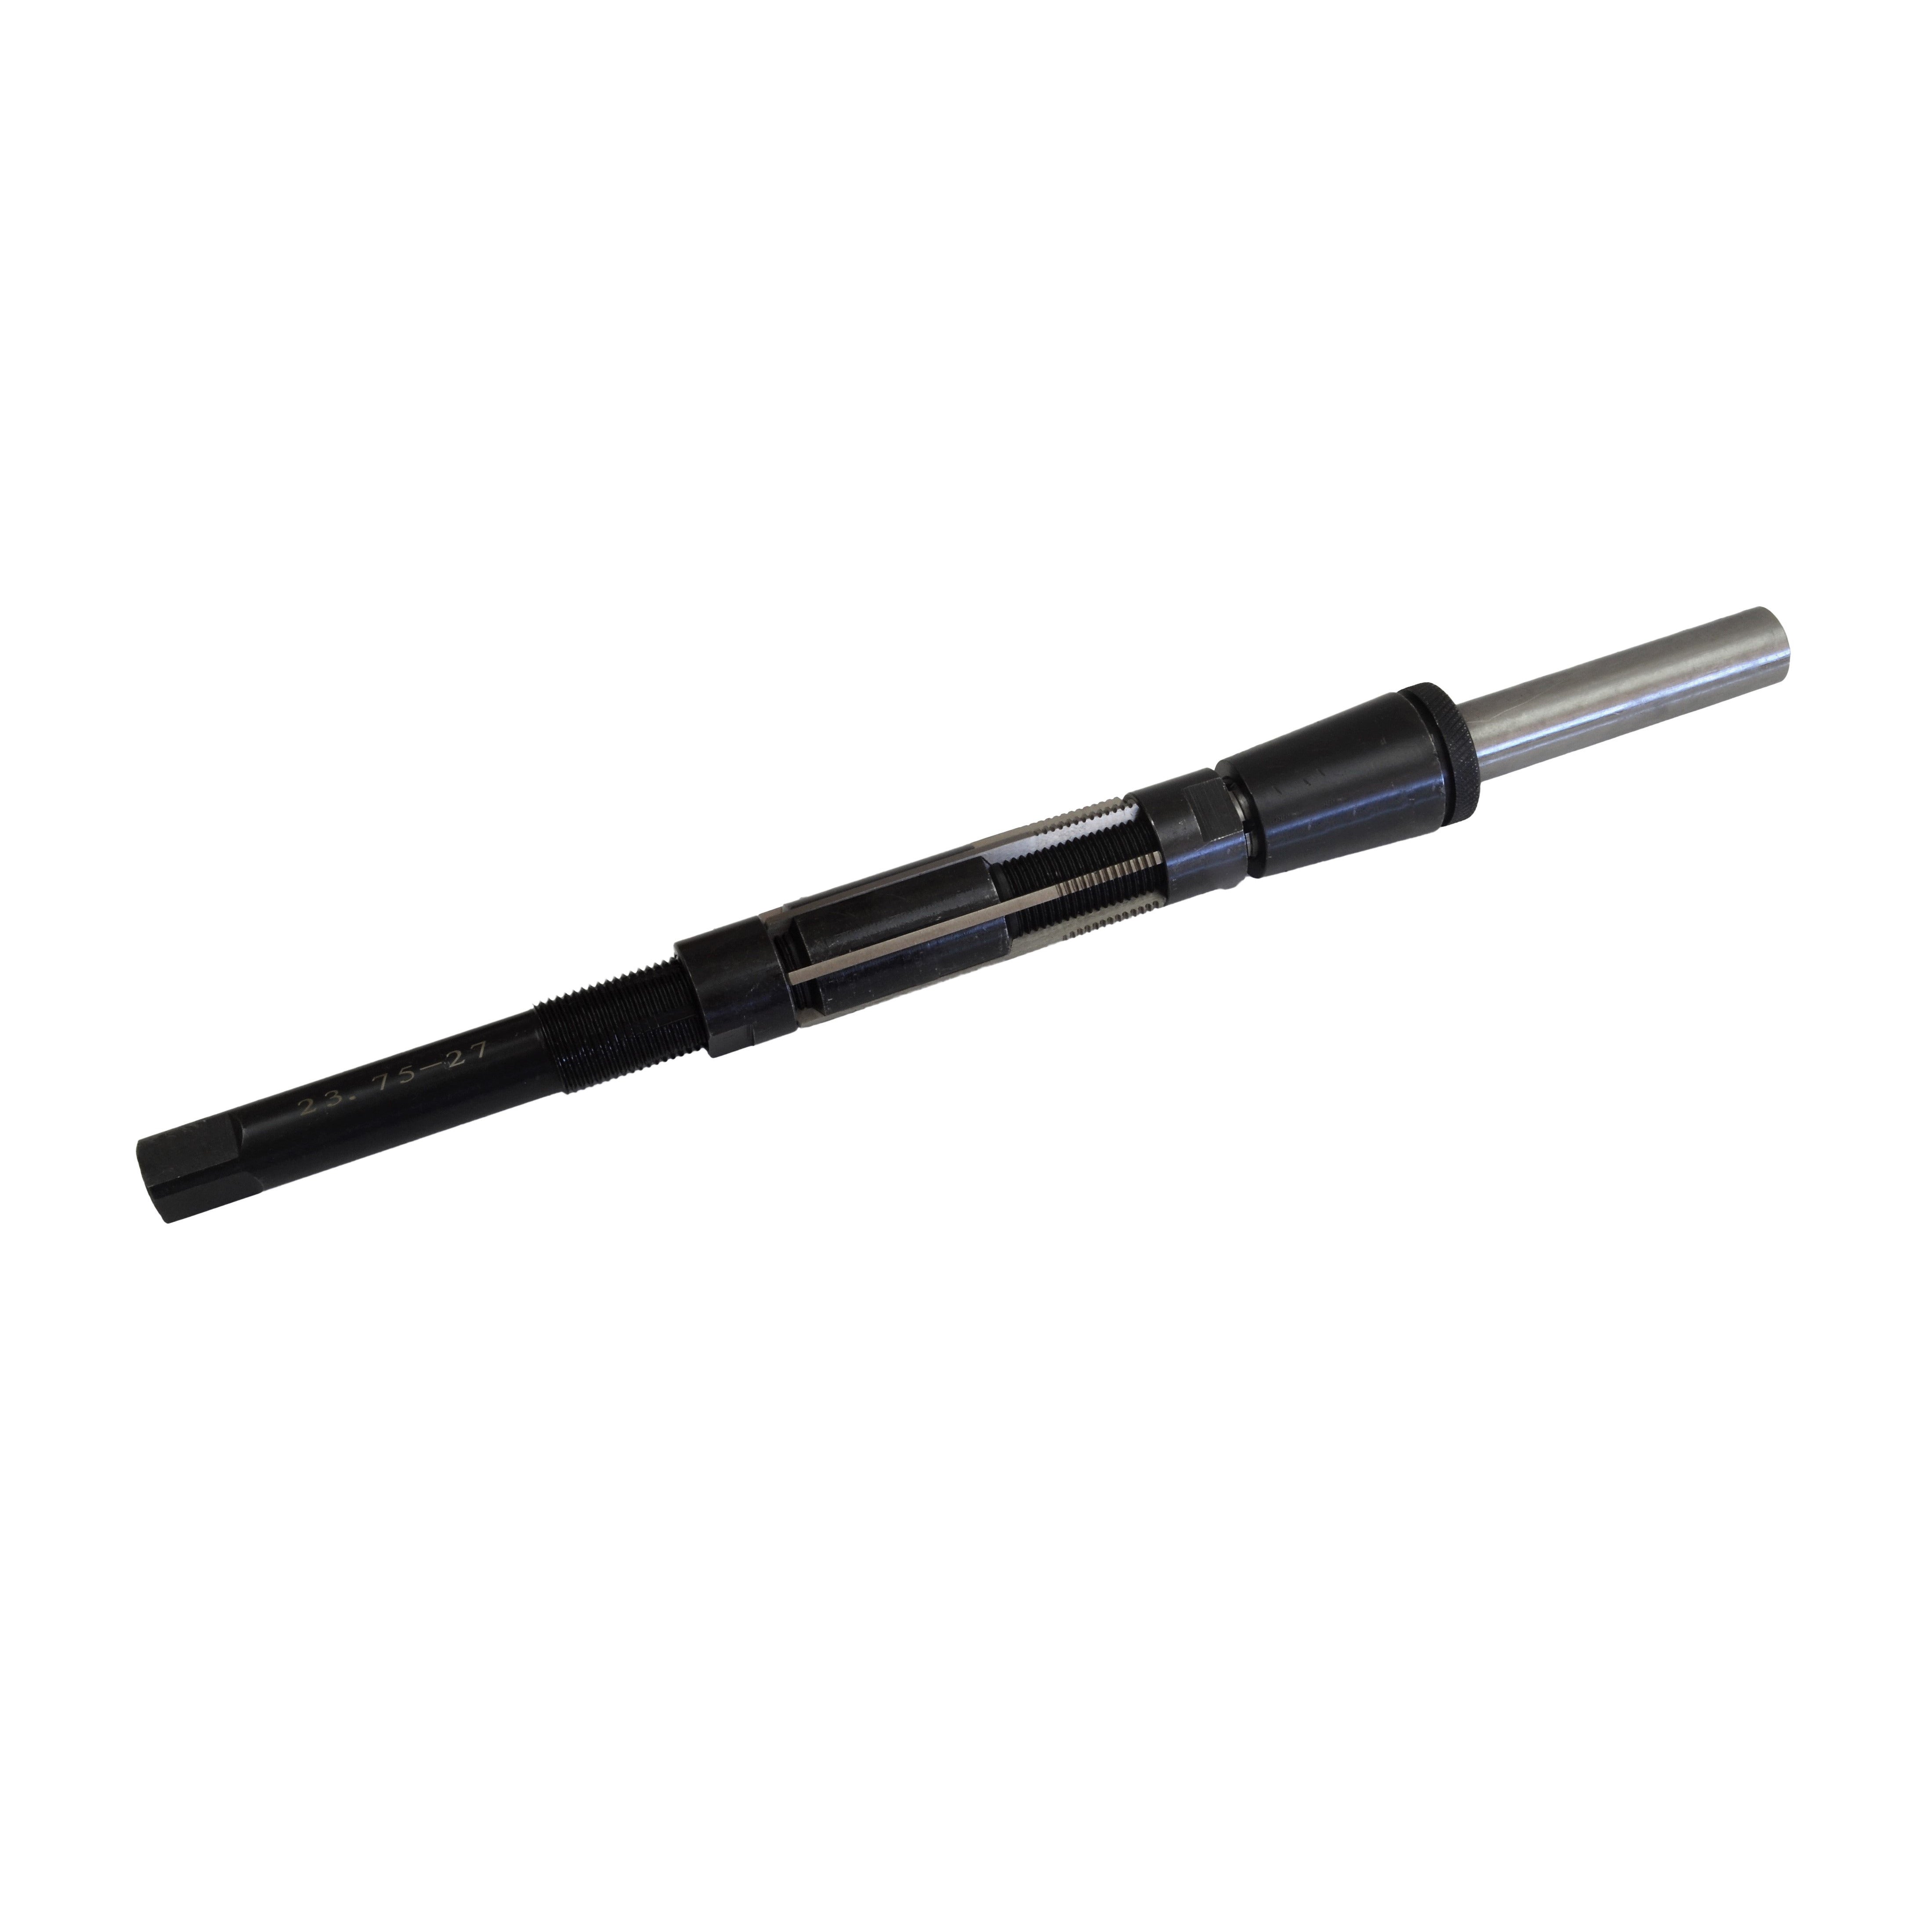 23.75 - 27mm Adjustable Hand Reamer with Guide